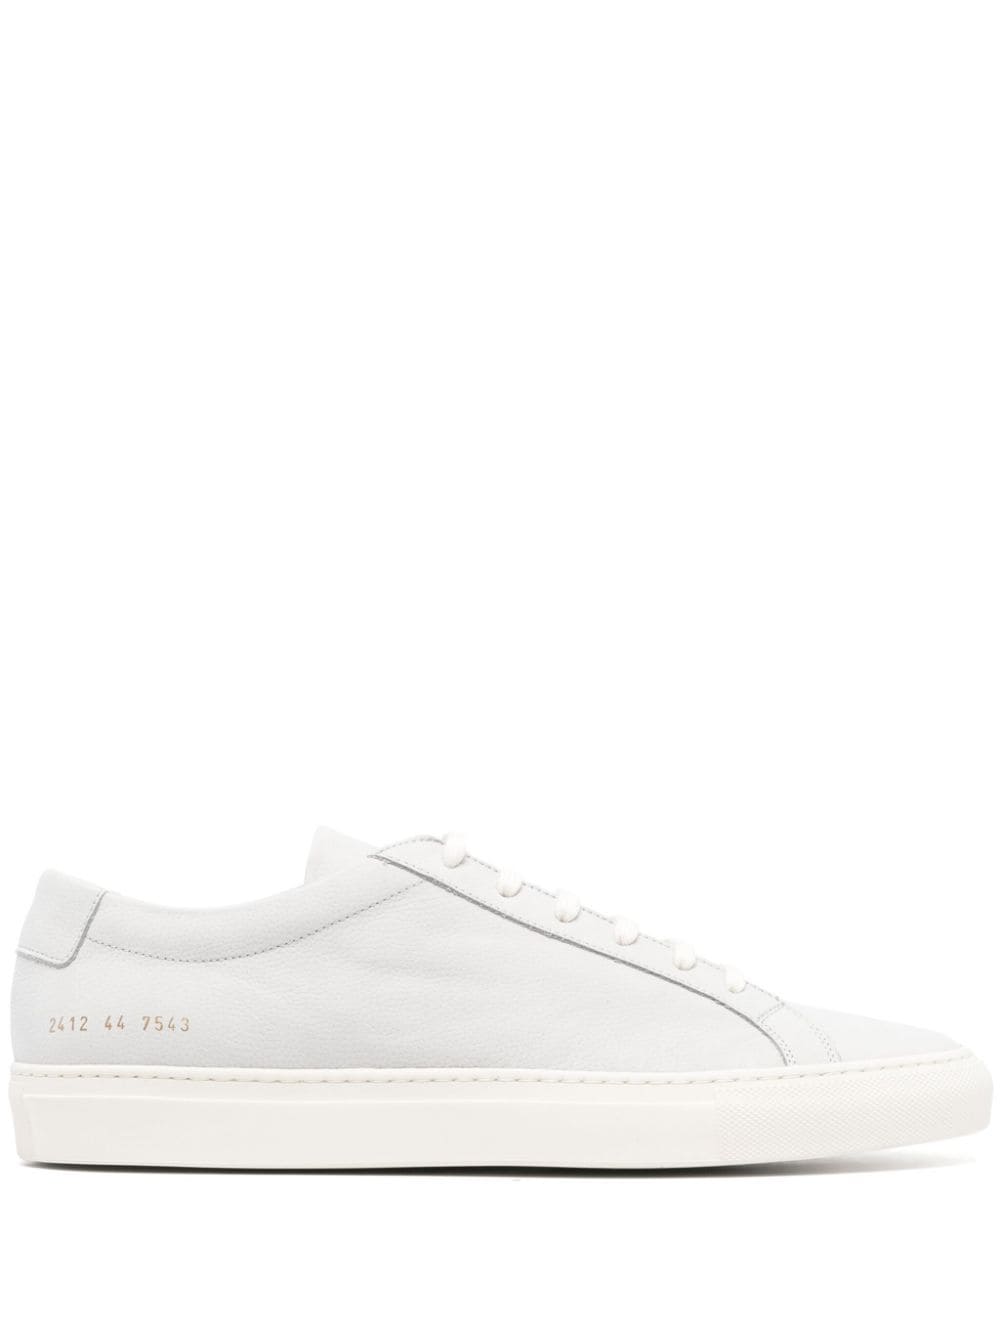 Common Projects Achilles Leather Sneakers In Grey